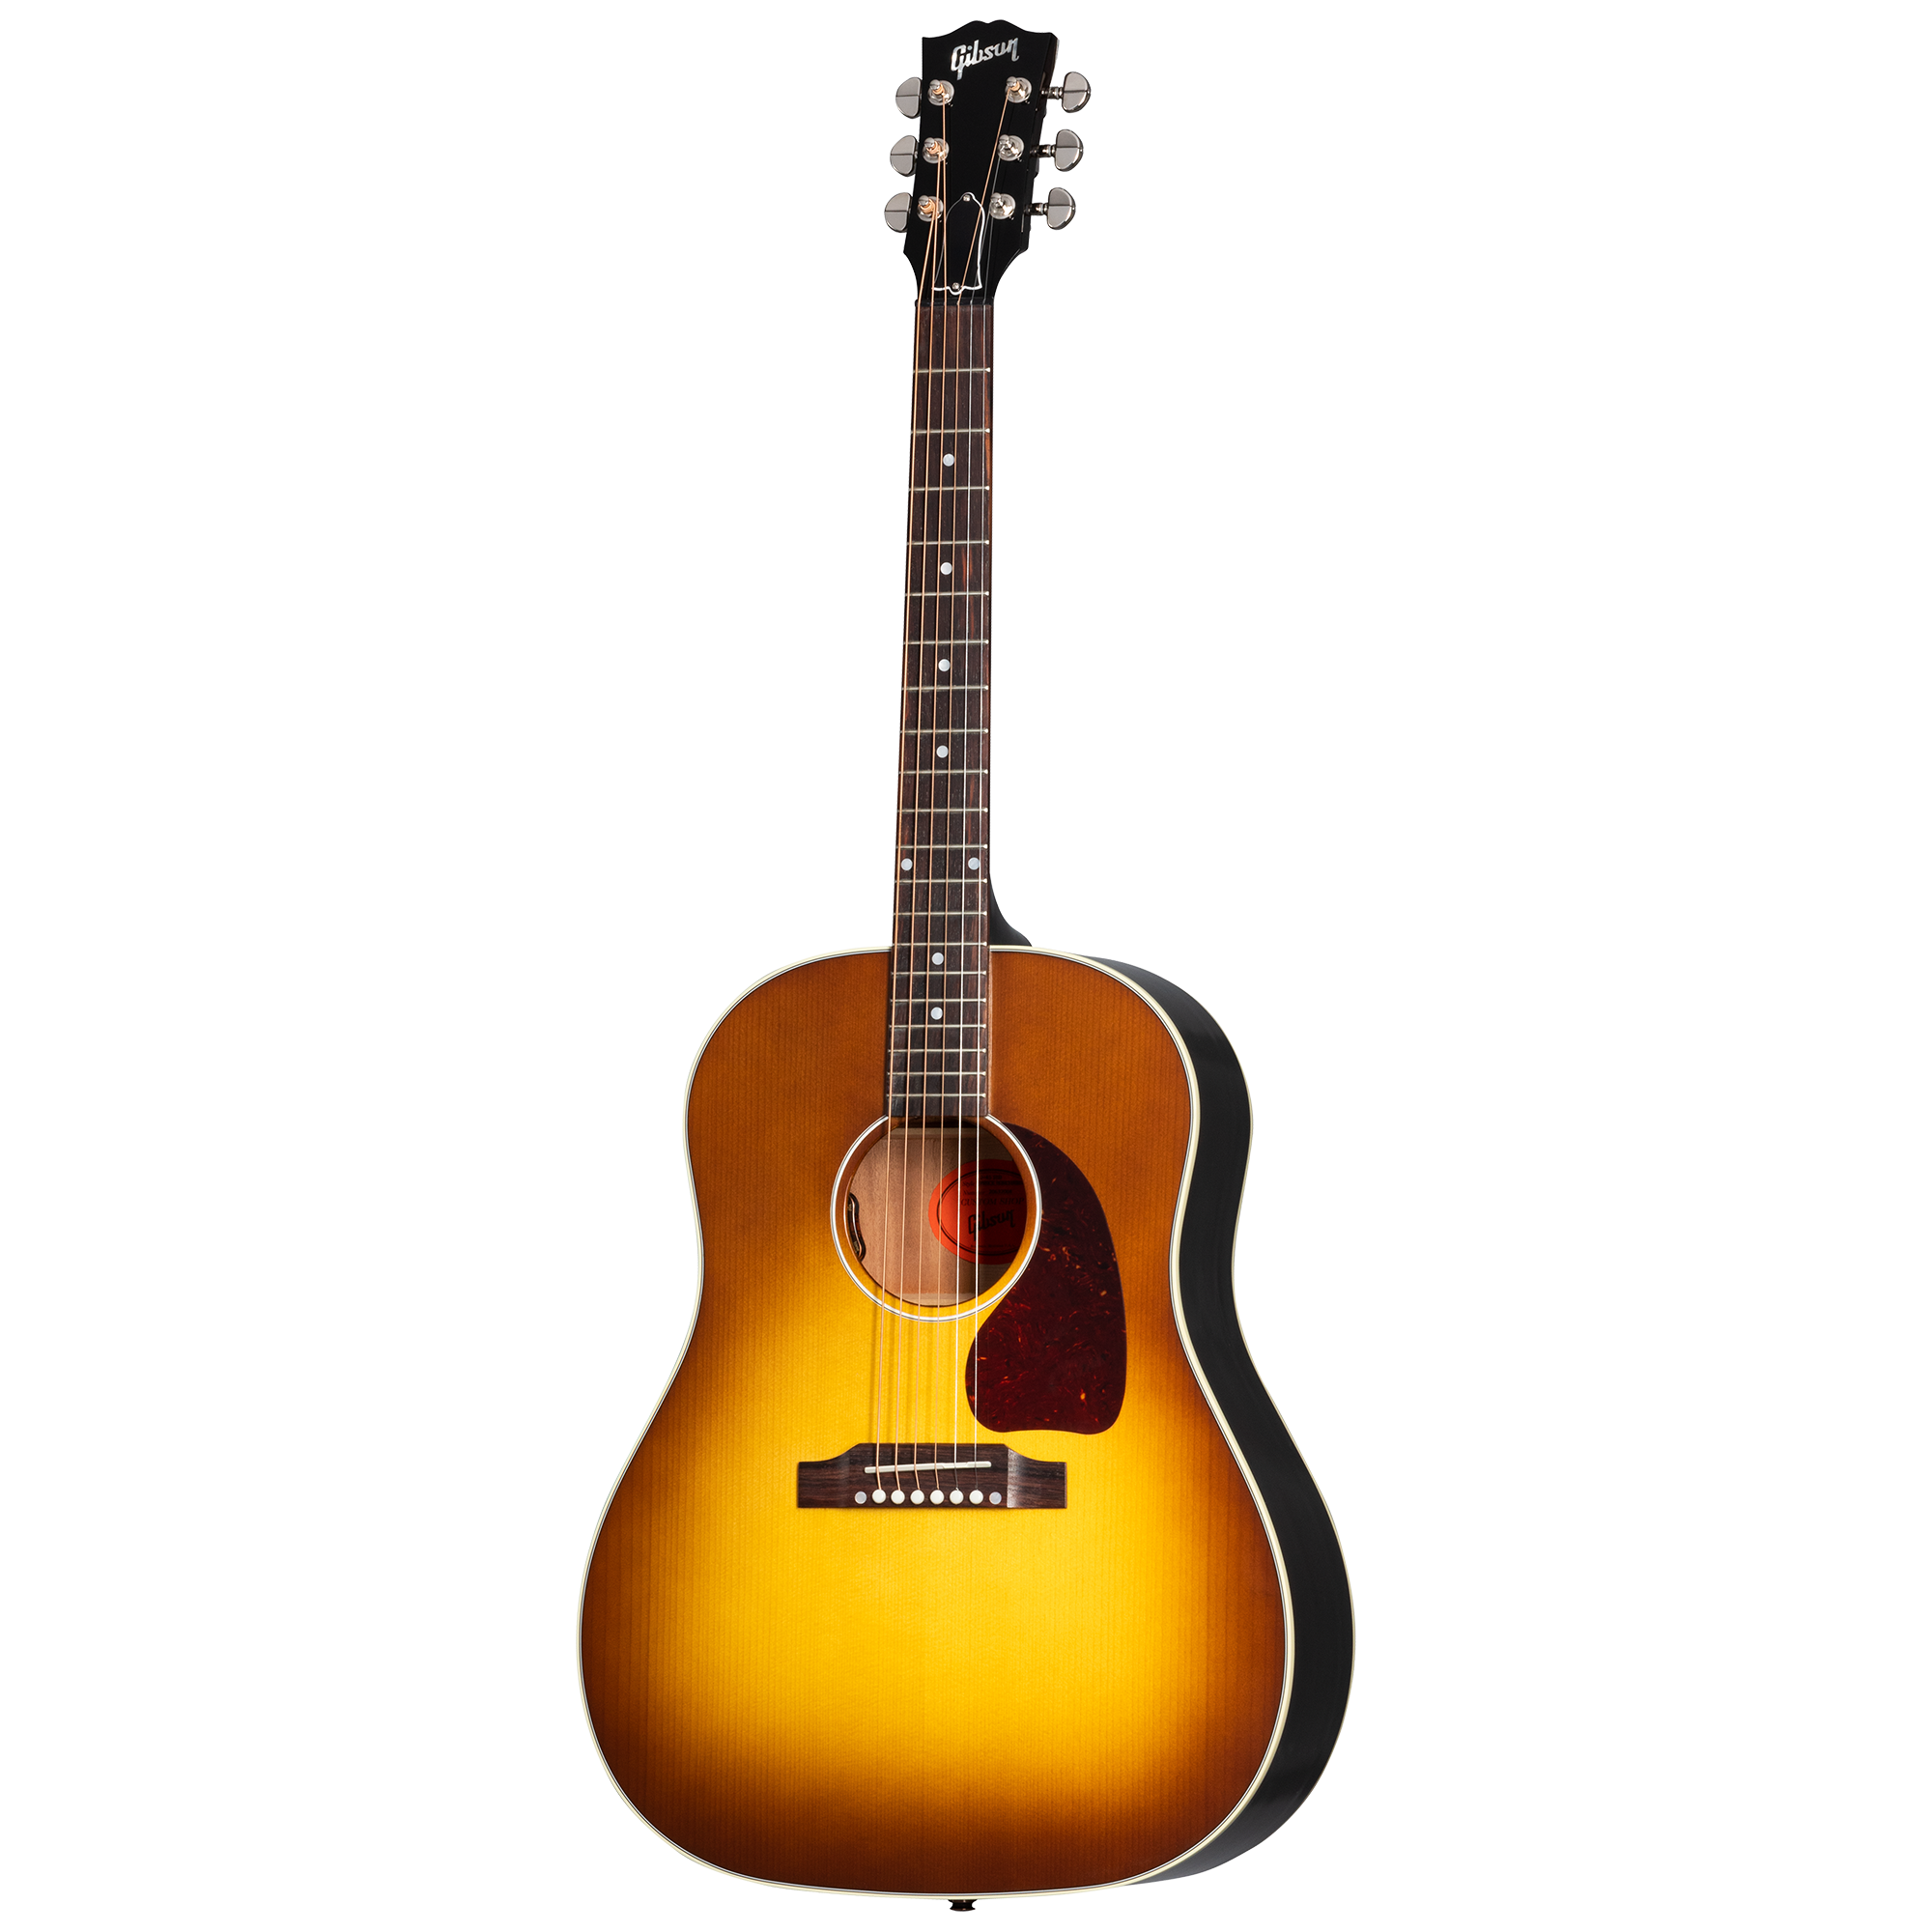 J-45 Standard, Red Spruce | Gibson